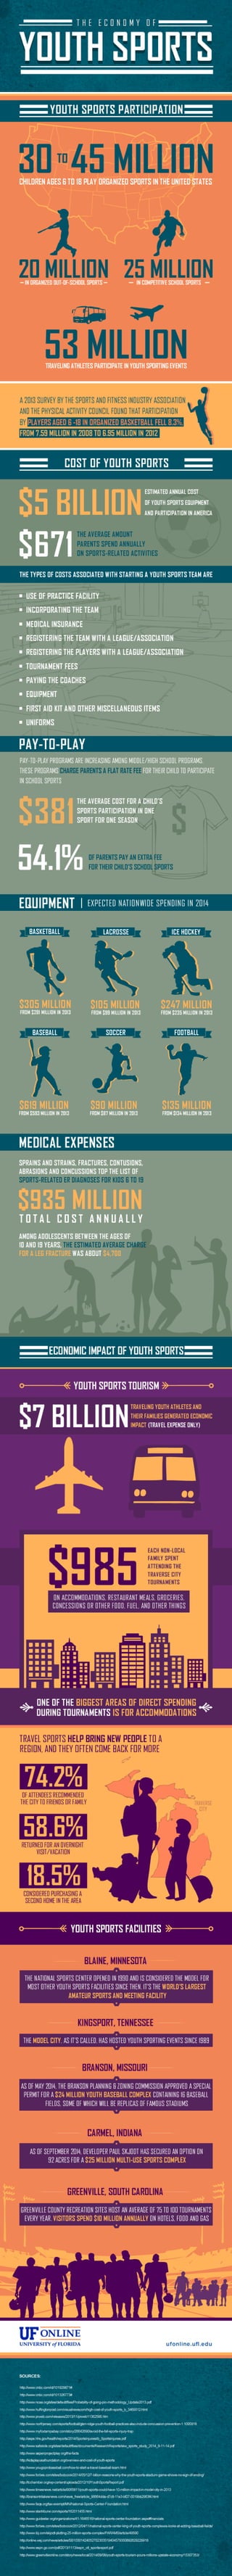 The Economy of Youth Sports